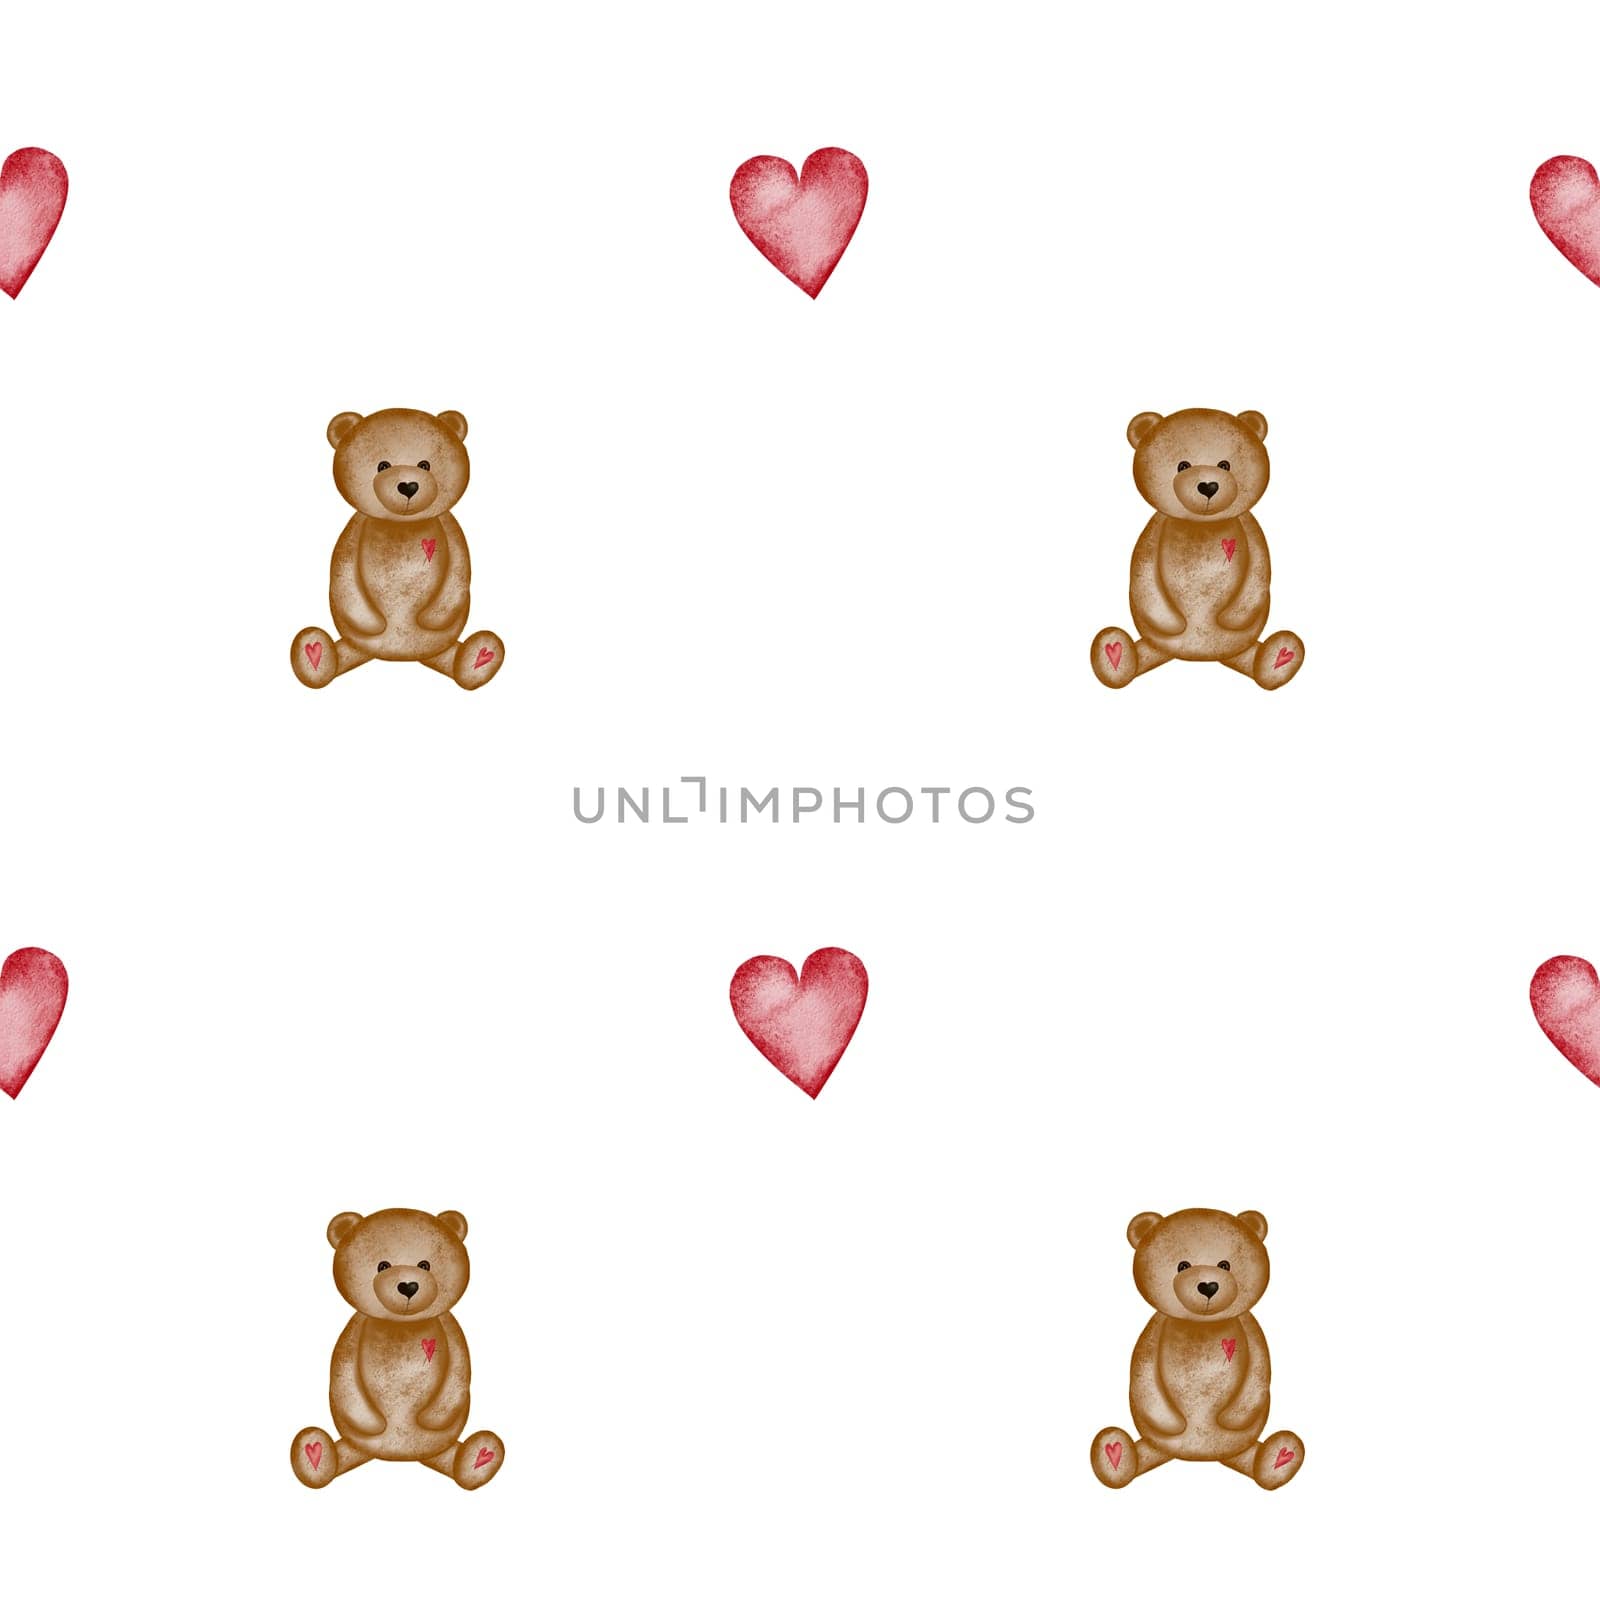 Adoreable watercolor seamless pattern teddy bear with red hearts. Cute print for wrapping paper and phone cases. High quality illustration